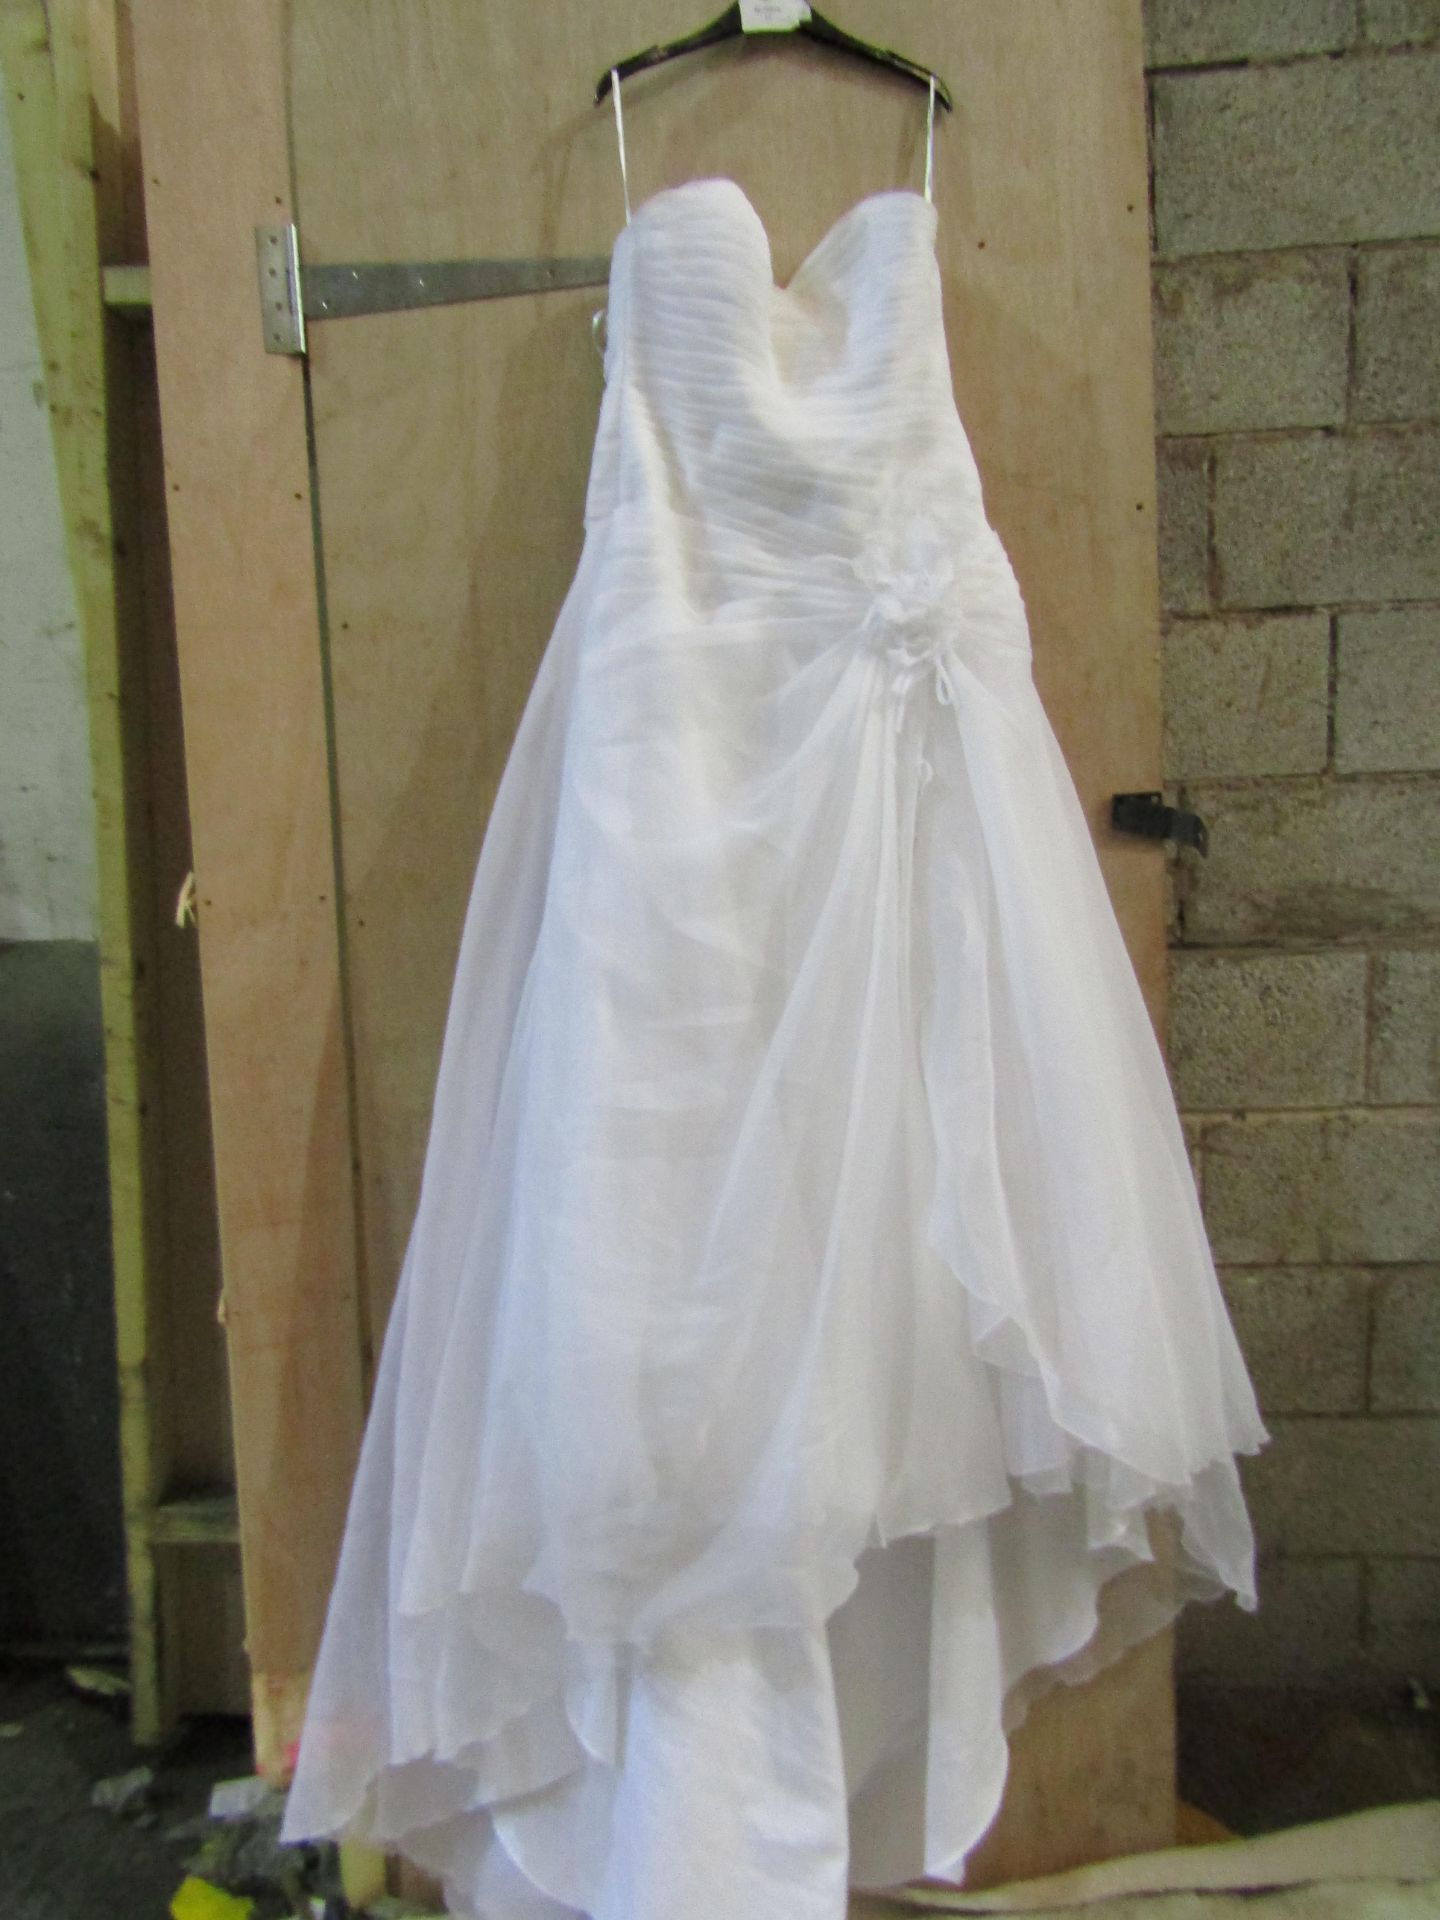 Approx 500 pieces of wedding shop stock to include wedding dresses, mother of the bride, dresses, - Image 61 of 71